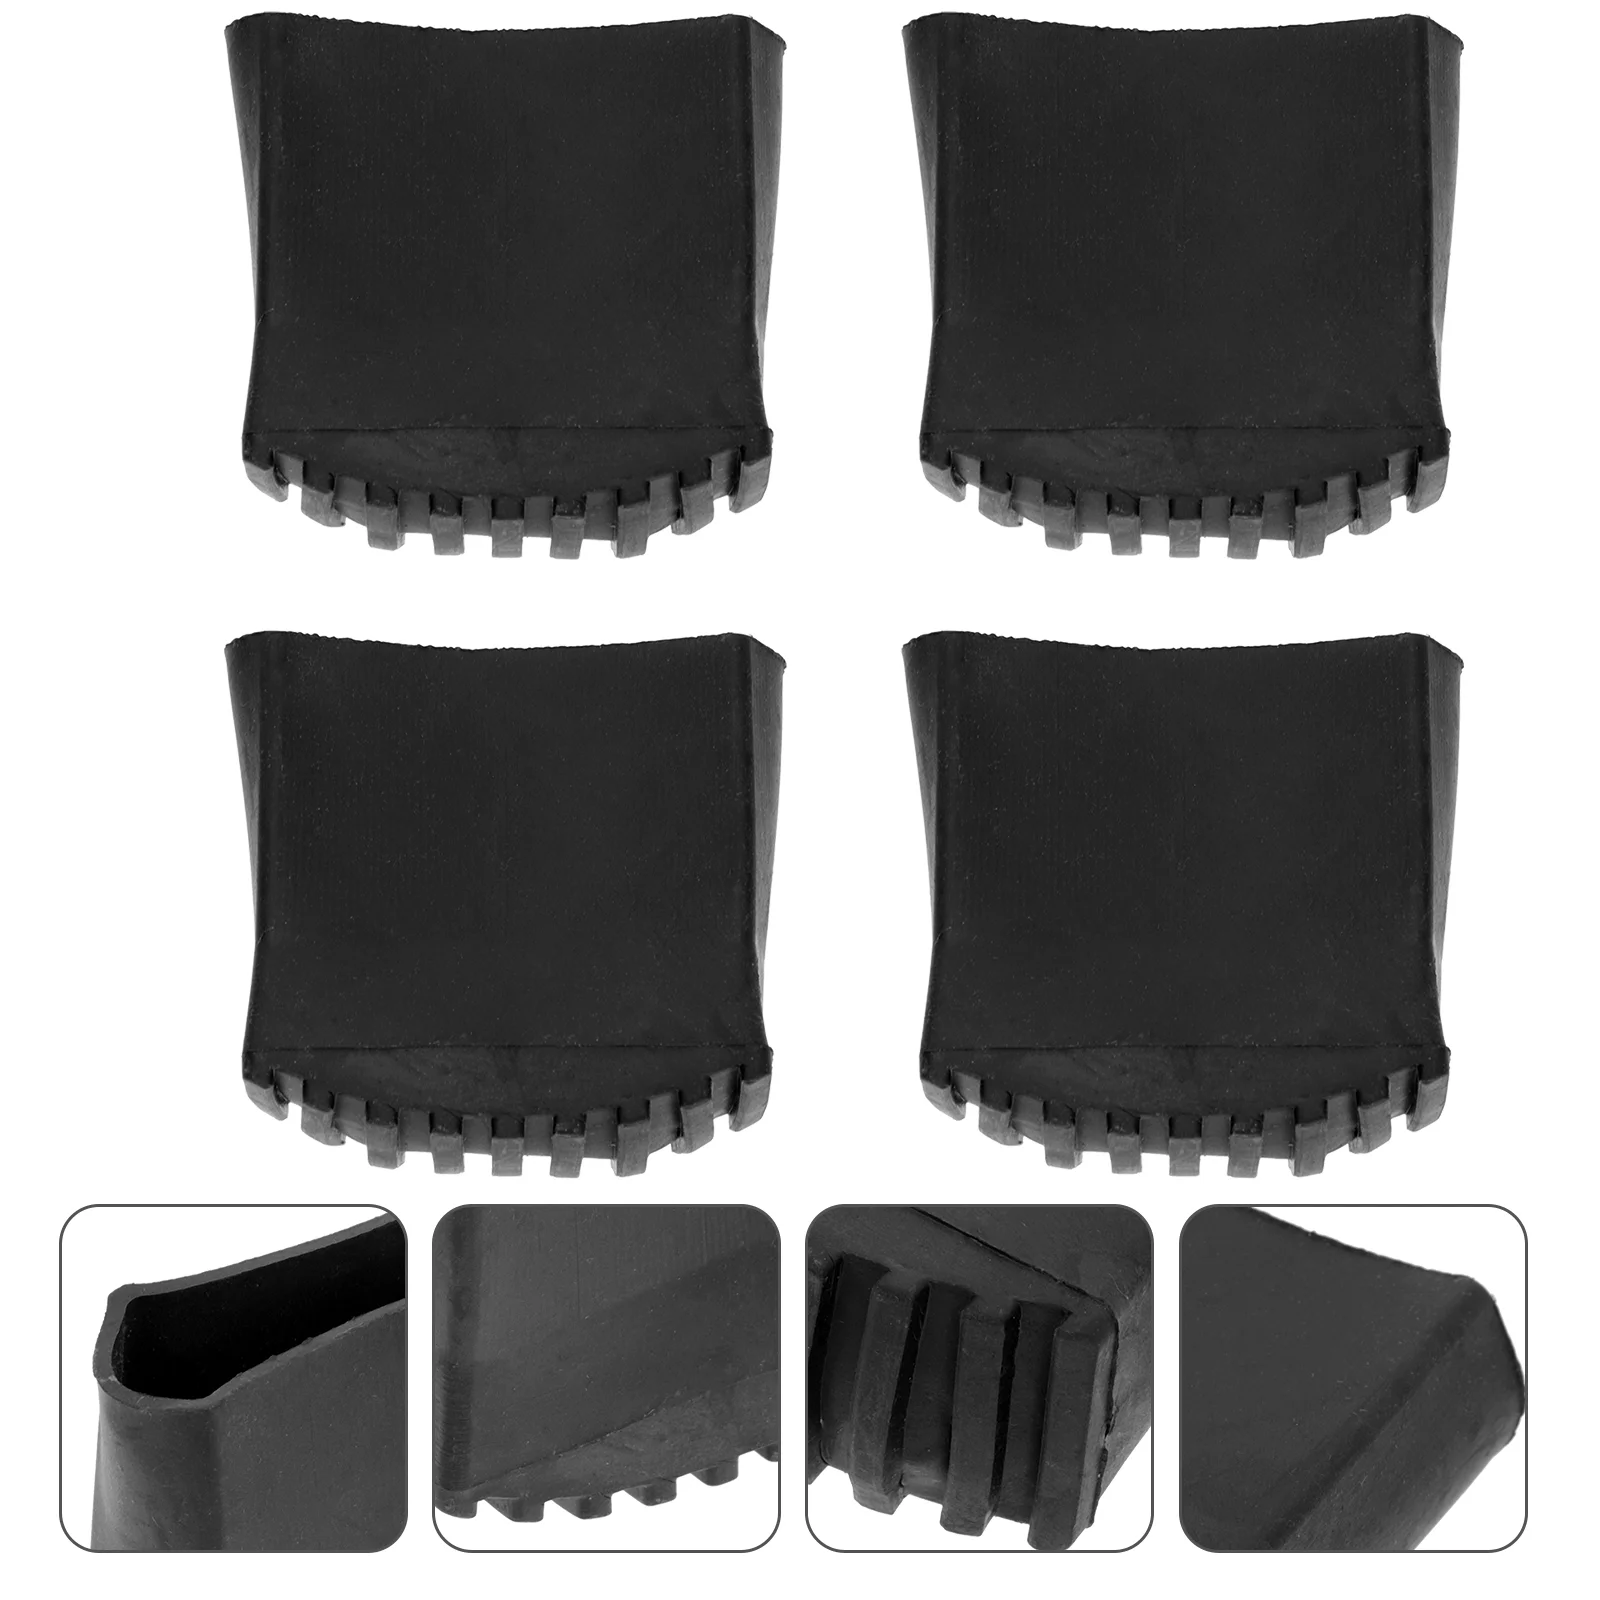 

4 Pcs Ladder Feet Accessory Step Pads Non-skid Mat Folding Rest Glider Chairs Foot Safe Protector Accessories Non-slip